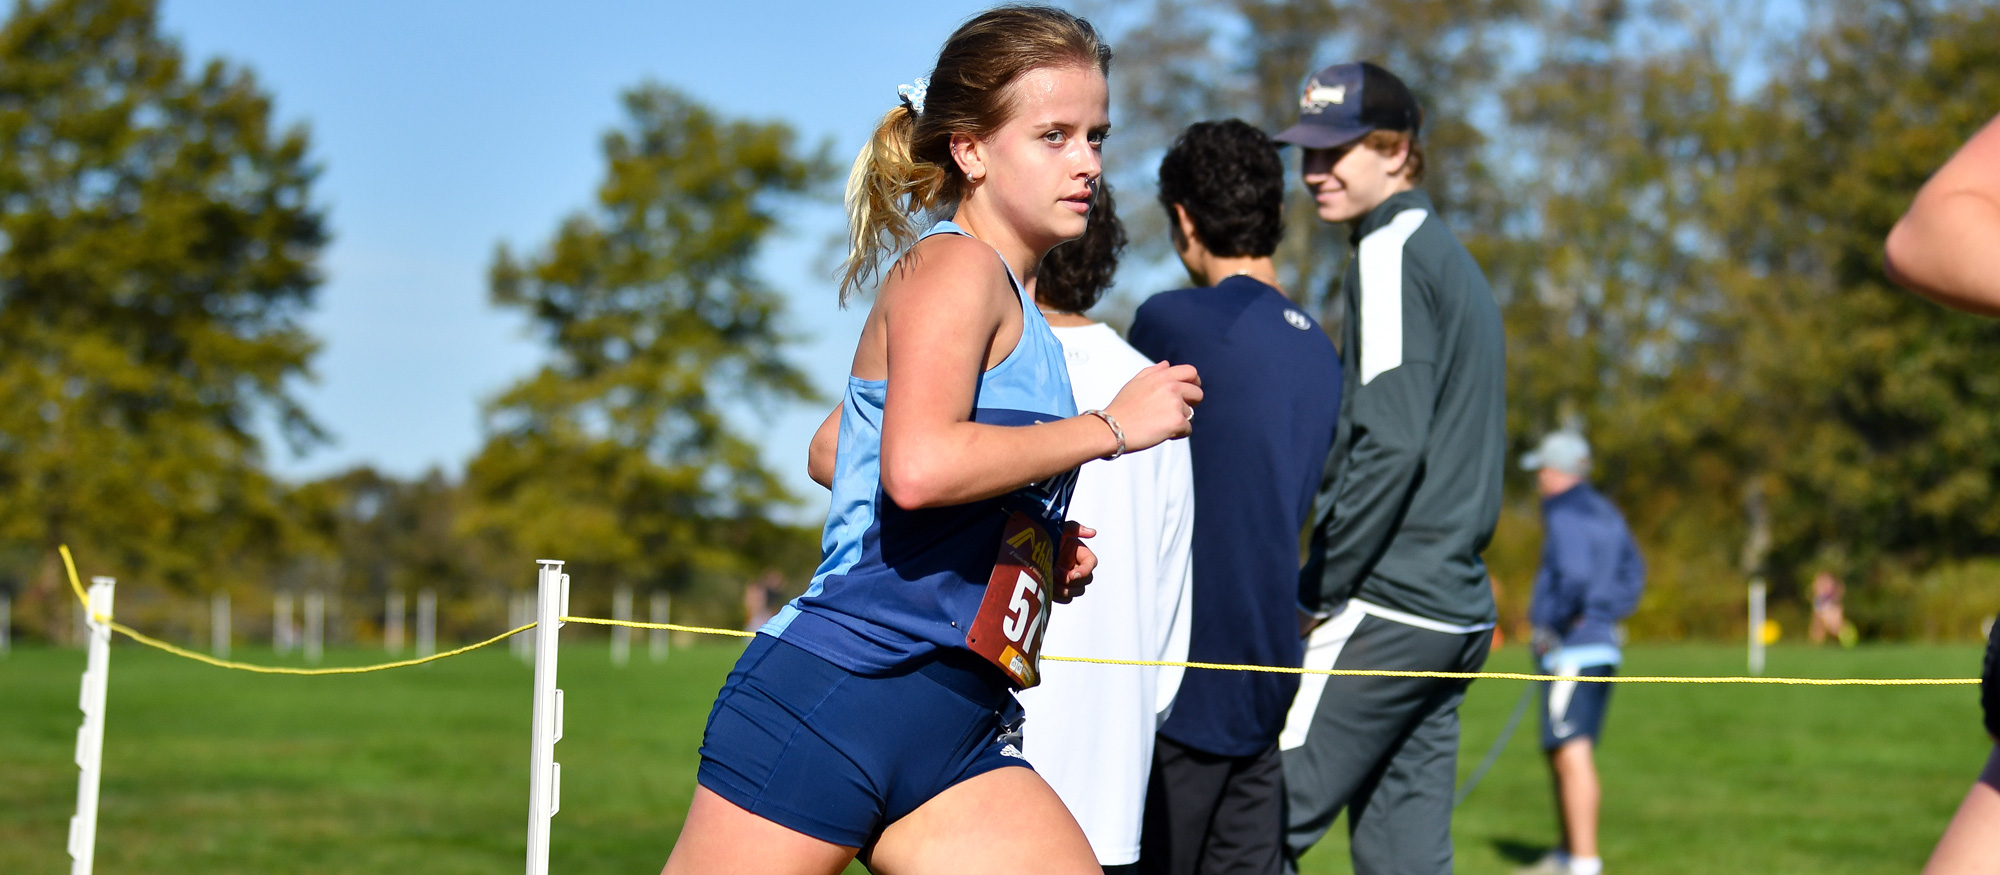 Greta Trapp placed 58th among 281 runners at the UMass-Dartmouth Invitational, helping Mount Holyoke place fourth out of 25 Division III teams on Sept. 17, 2023. (RJB Sports file photo)